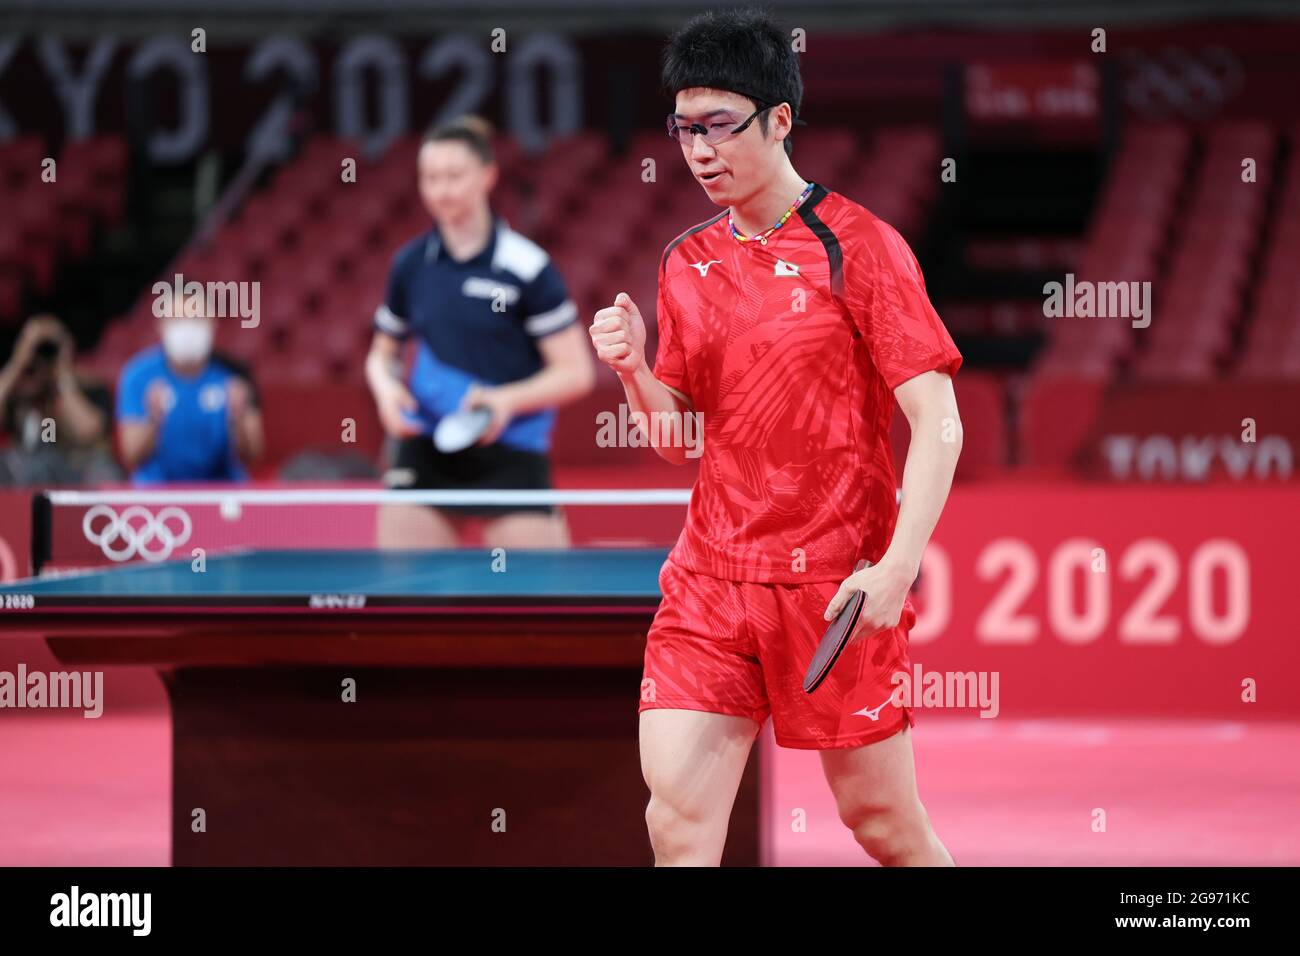 Olympic table tennis live